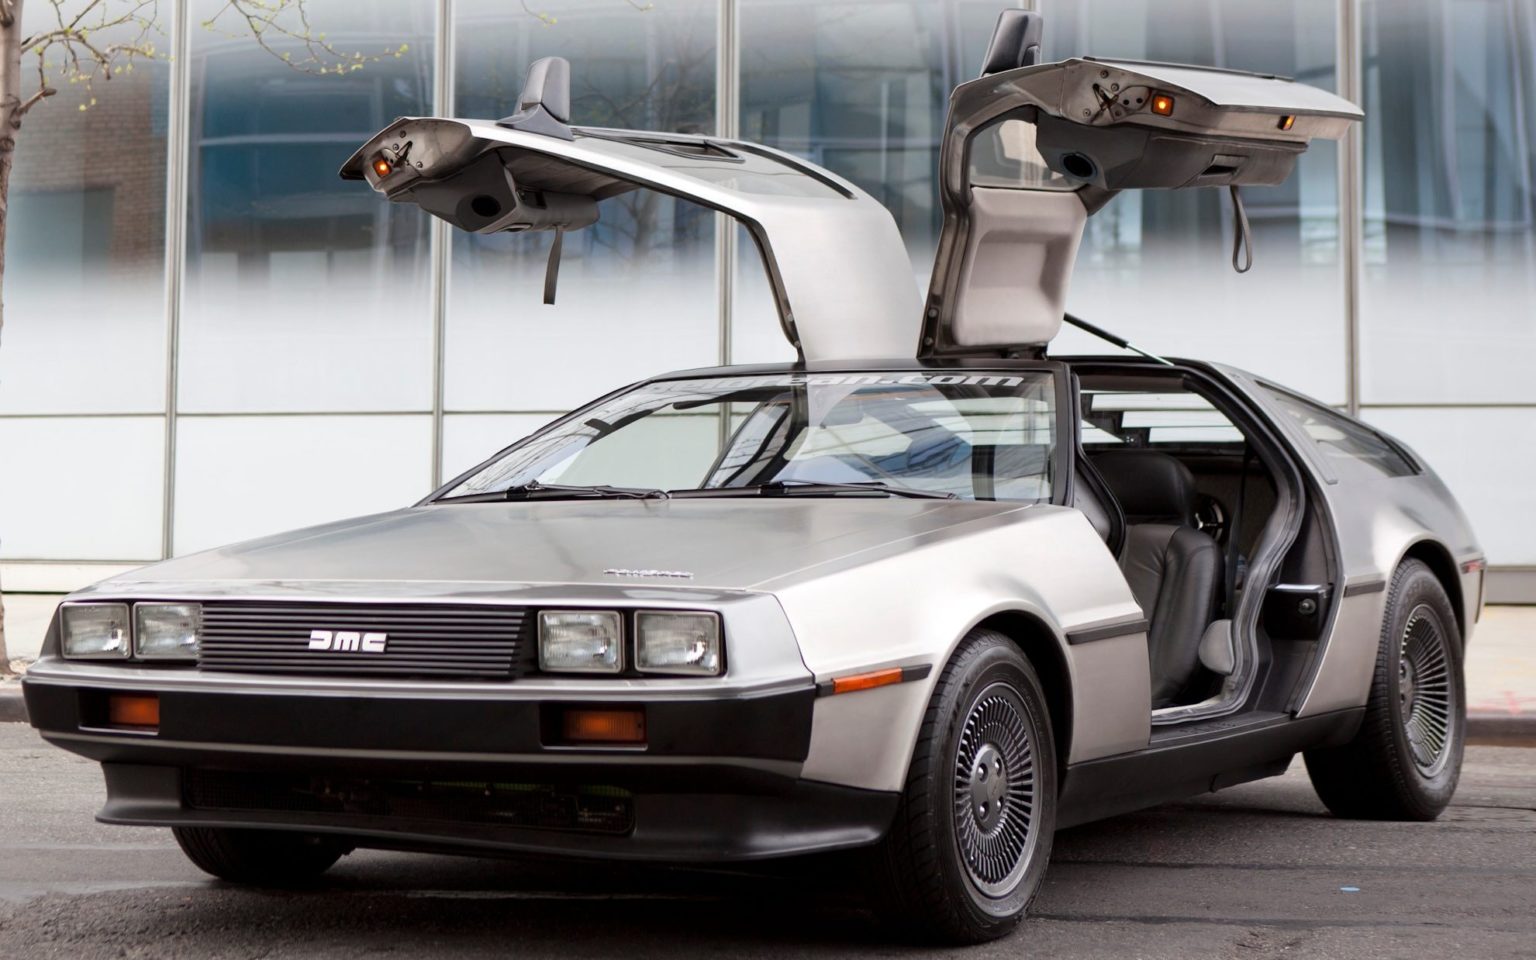 After 40 Years the DMC DeLorean will Enter Production as an EV.